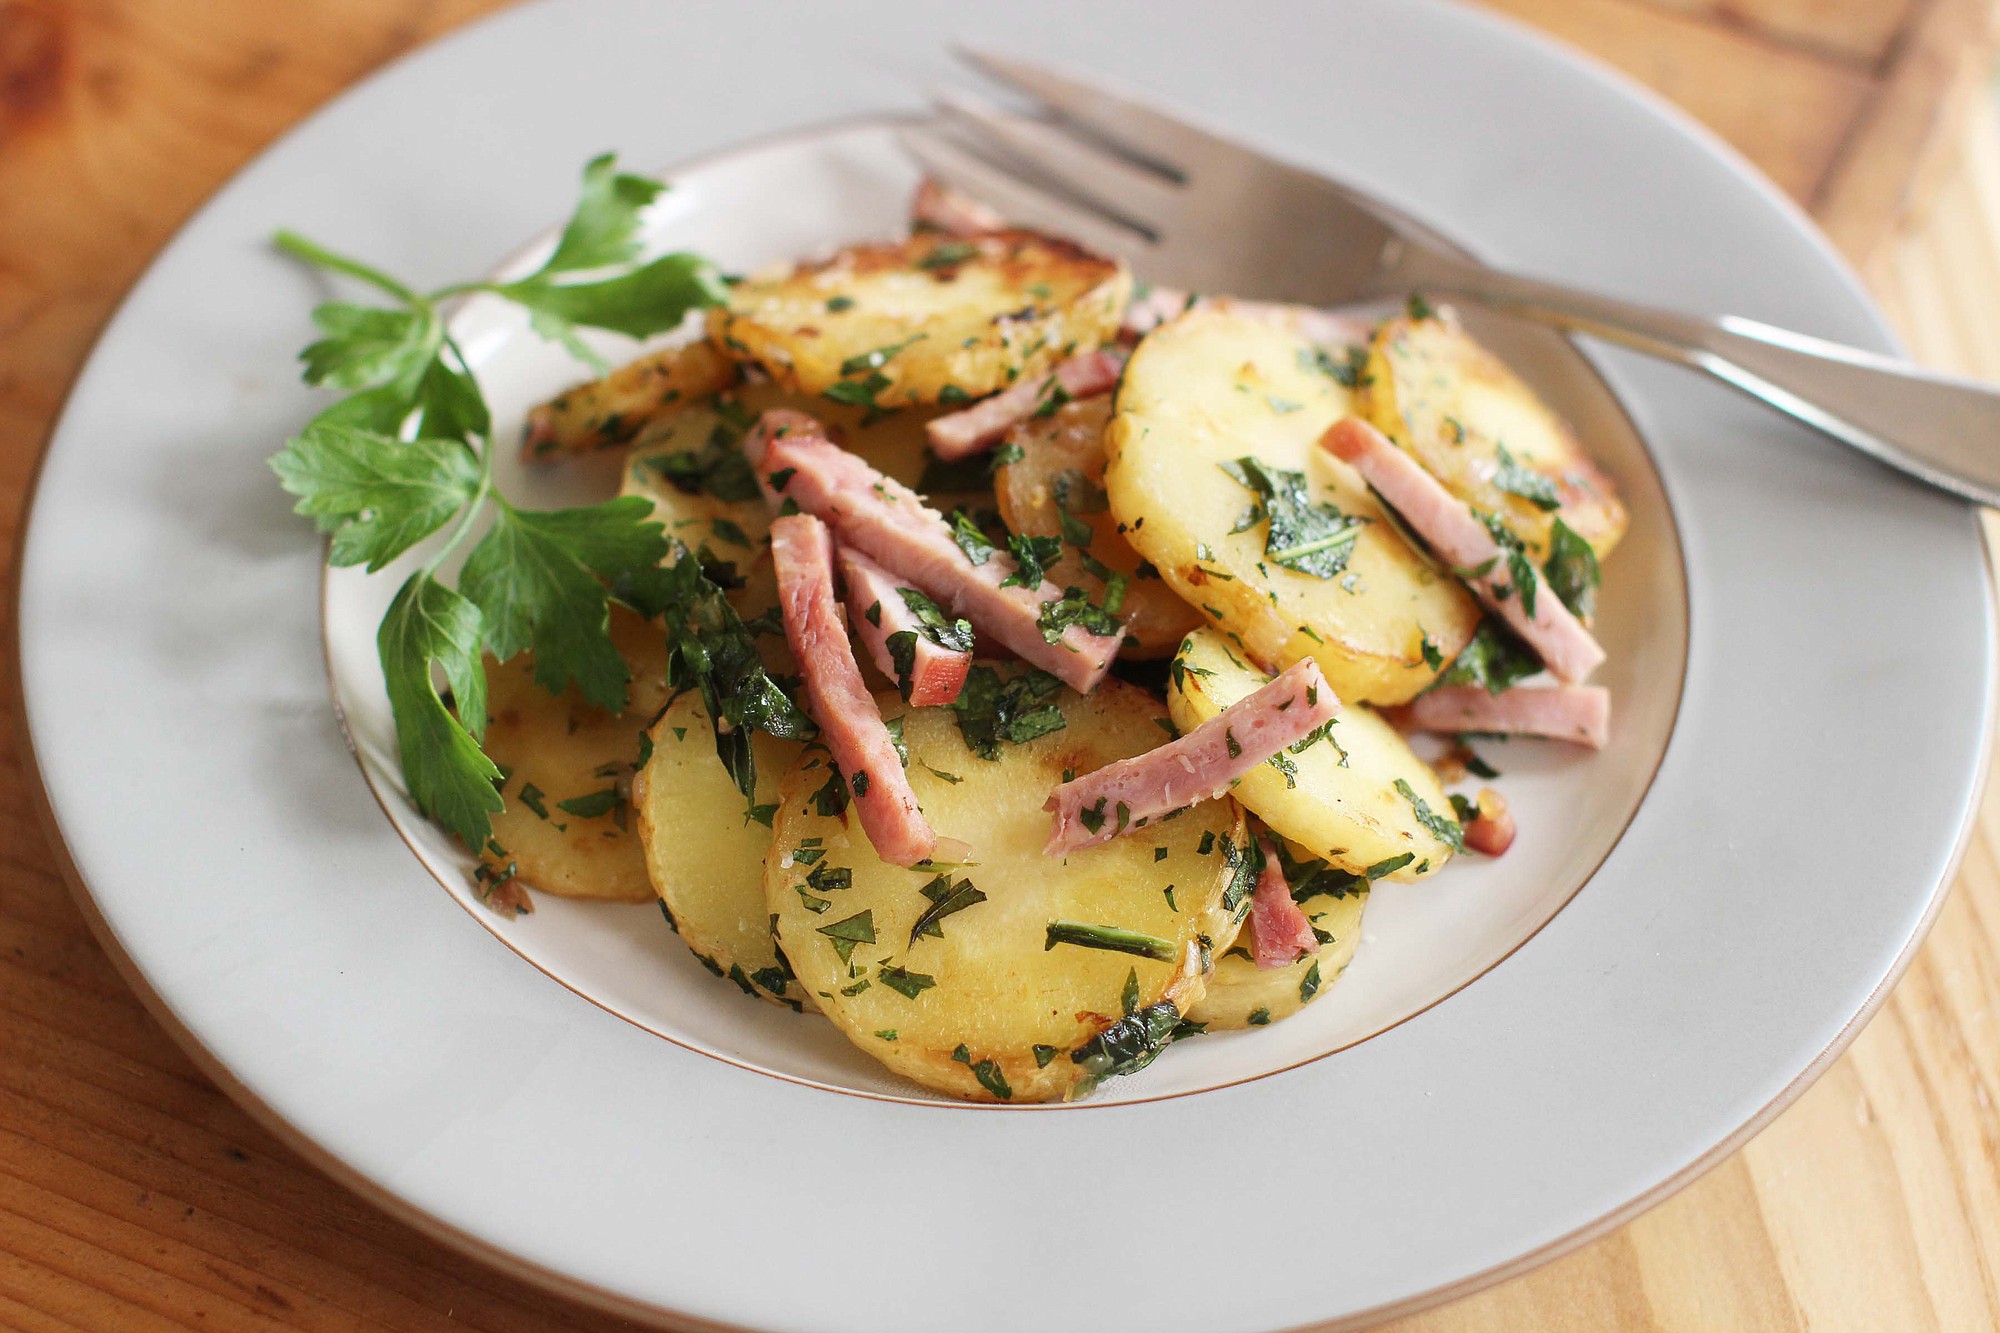 Sauteed parsnips with country ham.